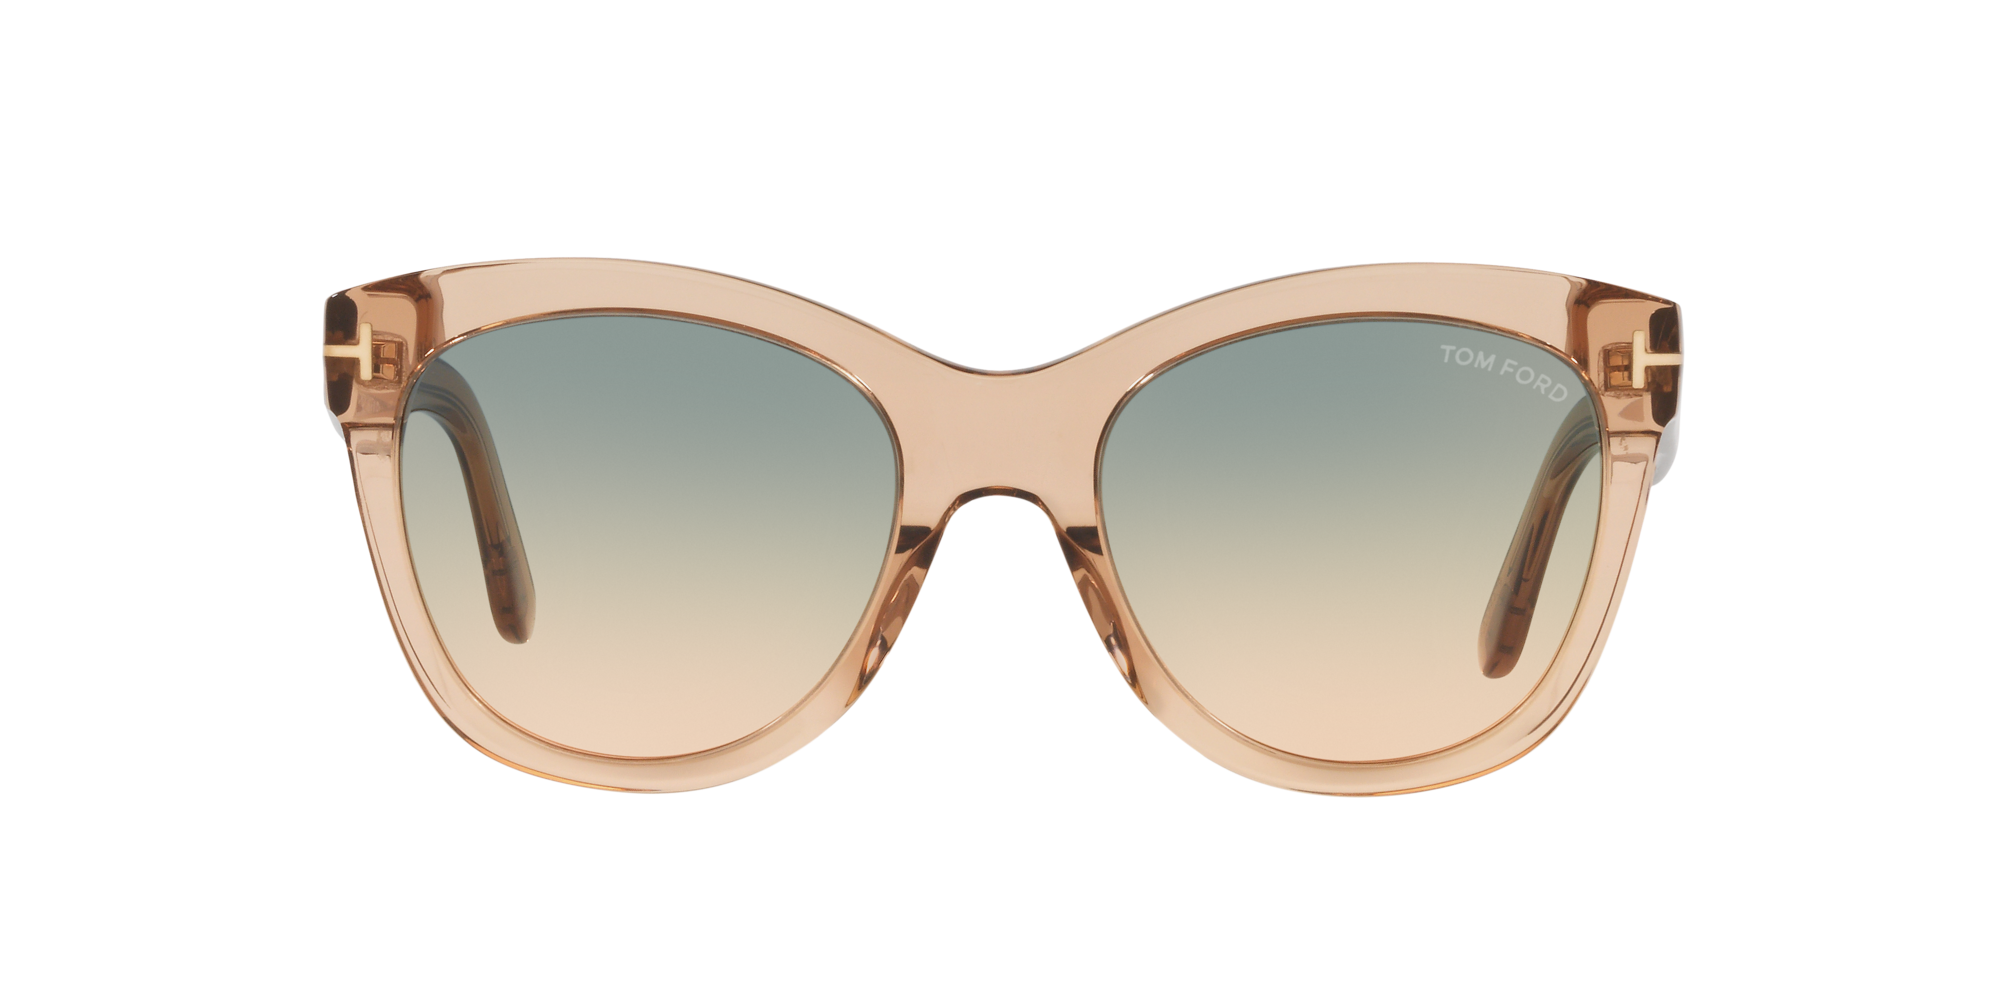 Tom Ford FT0870 54 Green Gradient & Brown Sunglasses | Sunglass